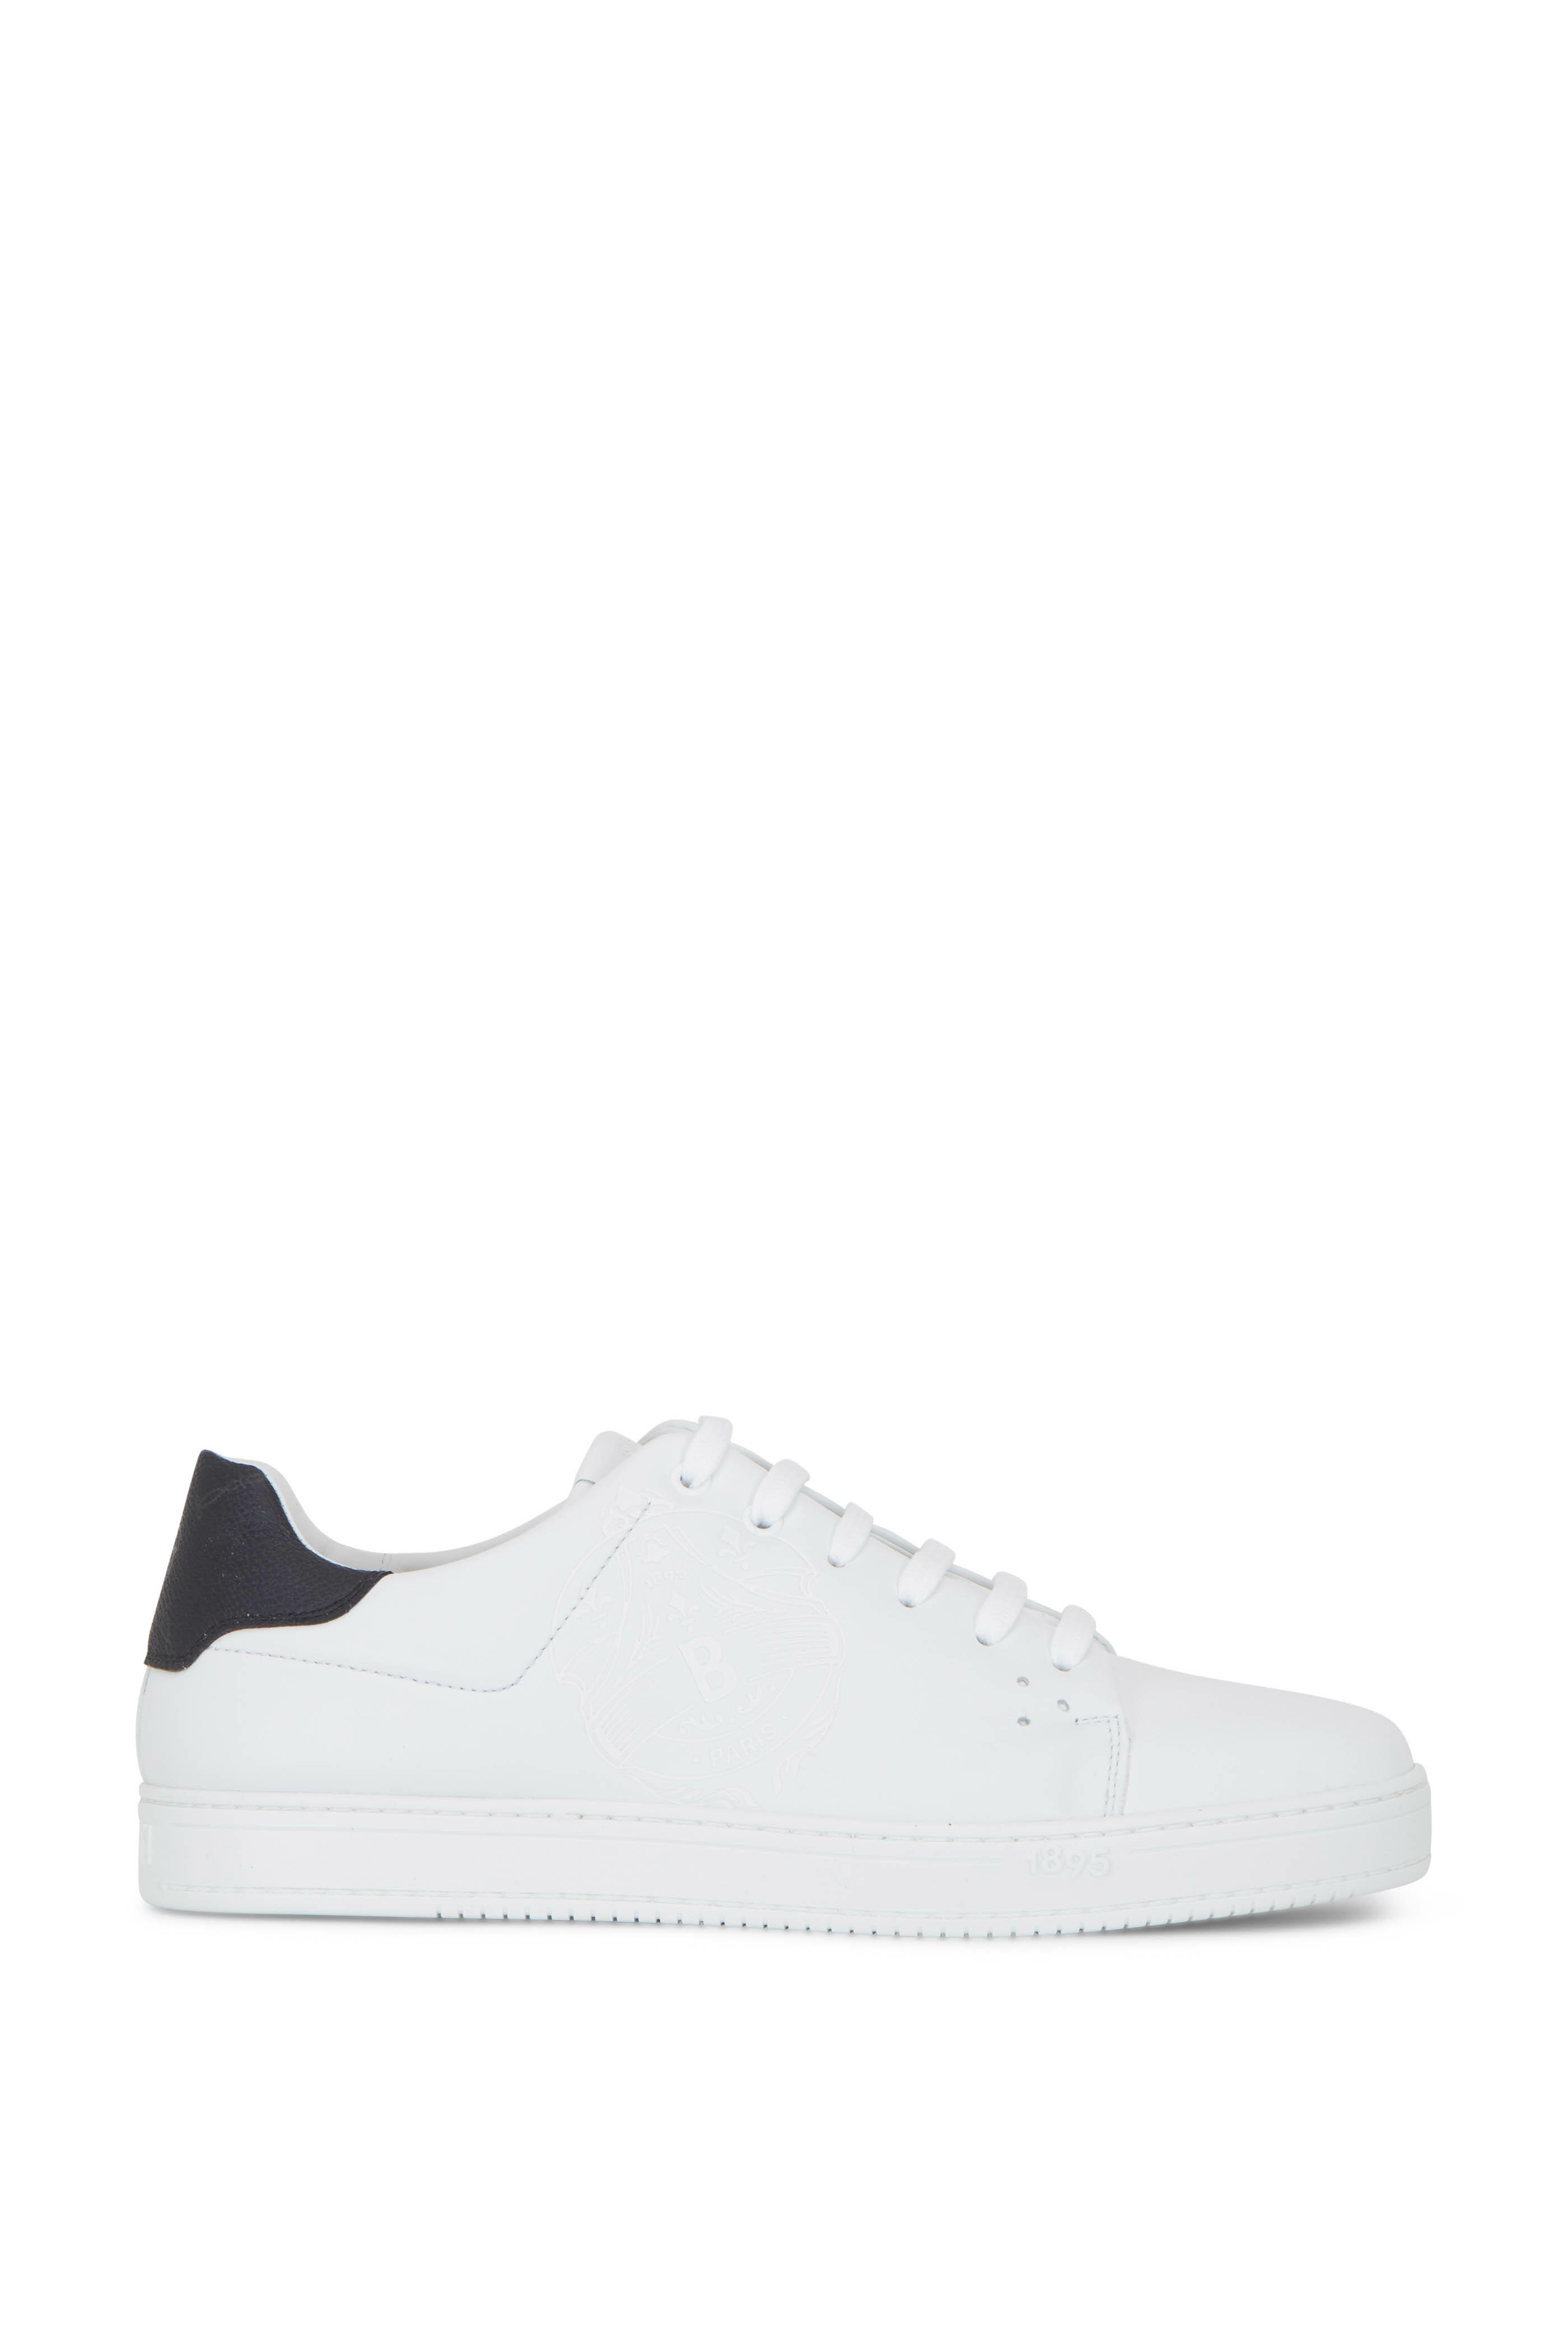 Berluti - Playtime Leather Sneaker | Mitchell Stores